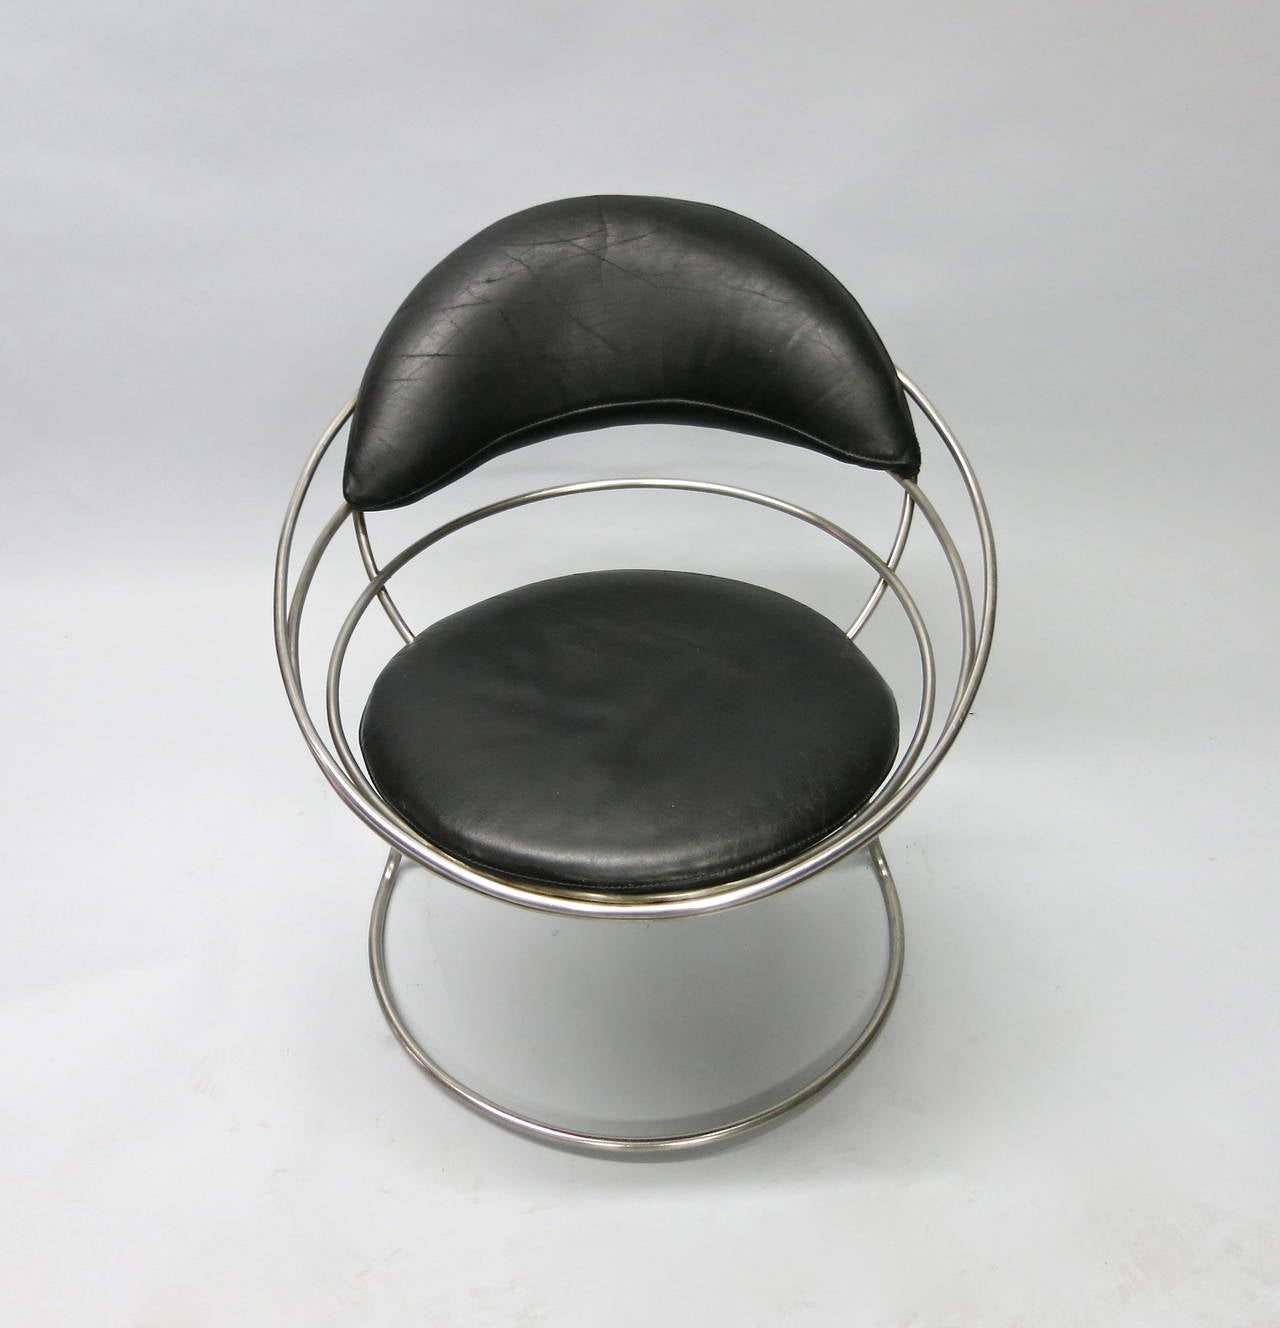 Chair with a tubular base and spiral frame that supports a black leather seat and back cushion. The 1960 original chair was designed and fabricated in France.